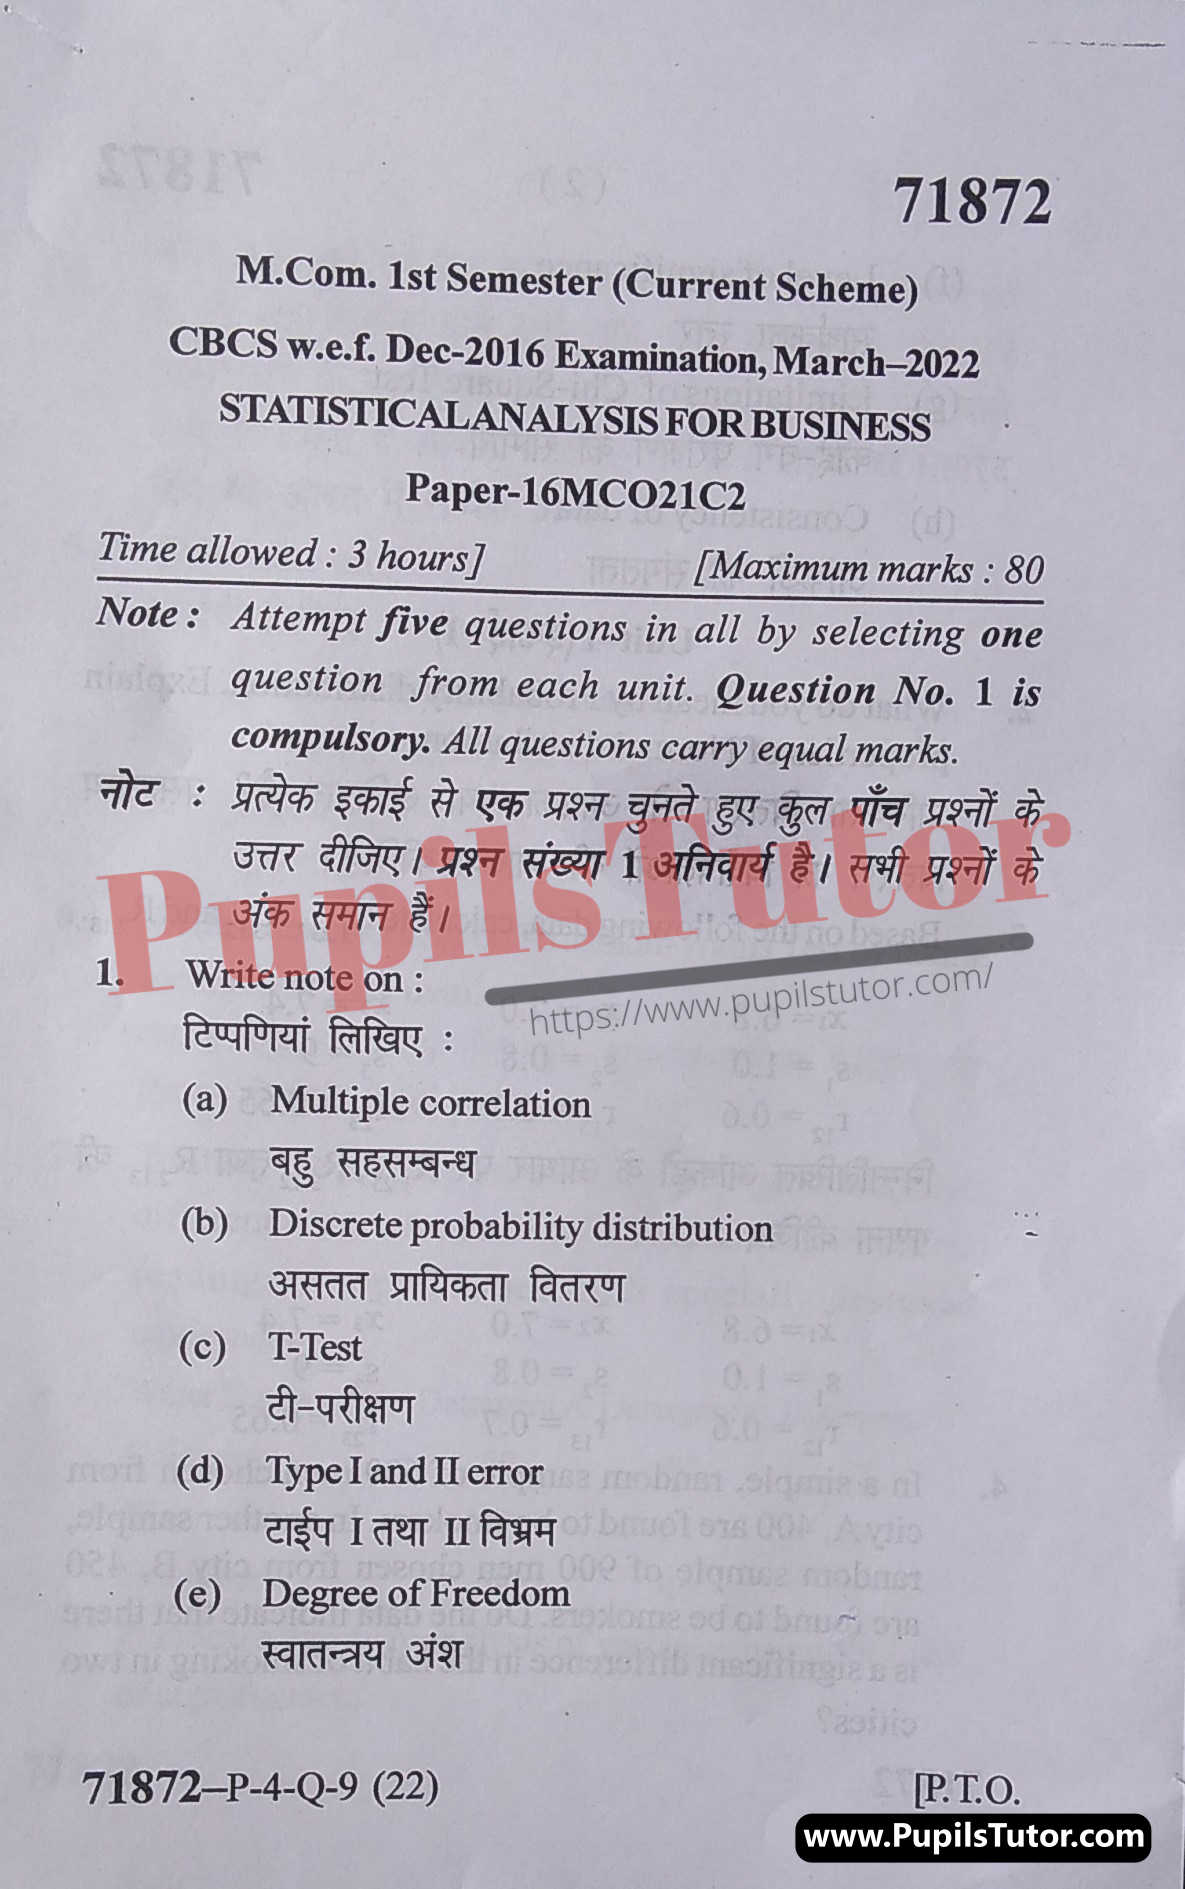 MDU (Maharshi Dayanand University, Rohtak Haryana) Mcom CBCS Scheme First Semester Previous Year Statistical Analysis For Business Question Paper For March, 2022 Exam (Question Paper Page 1) - pupilstutor.com